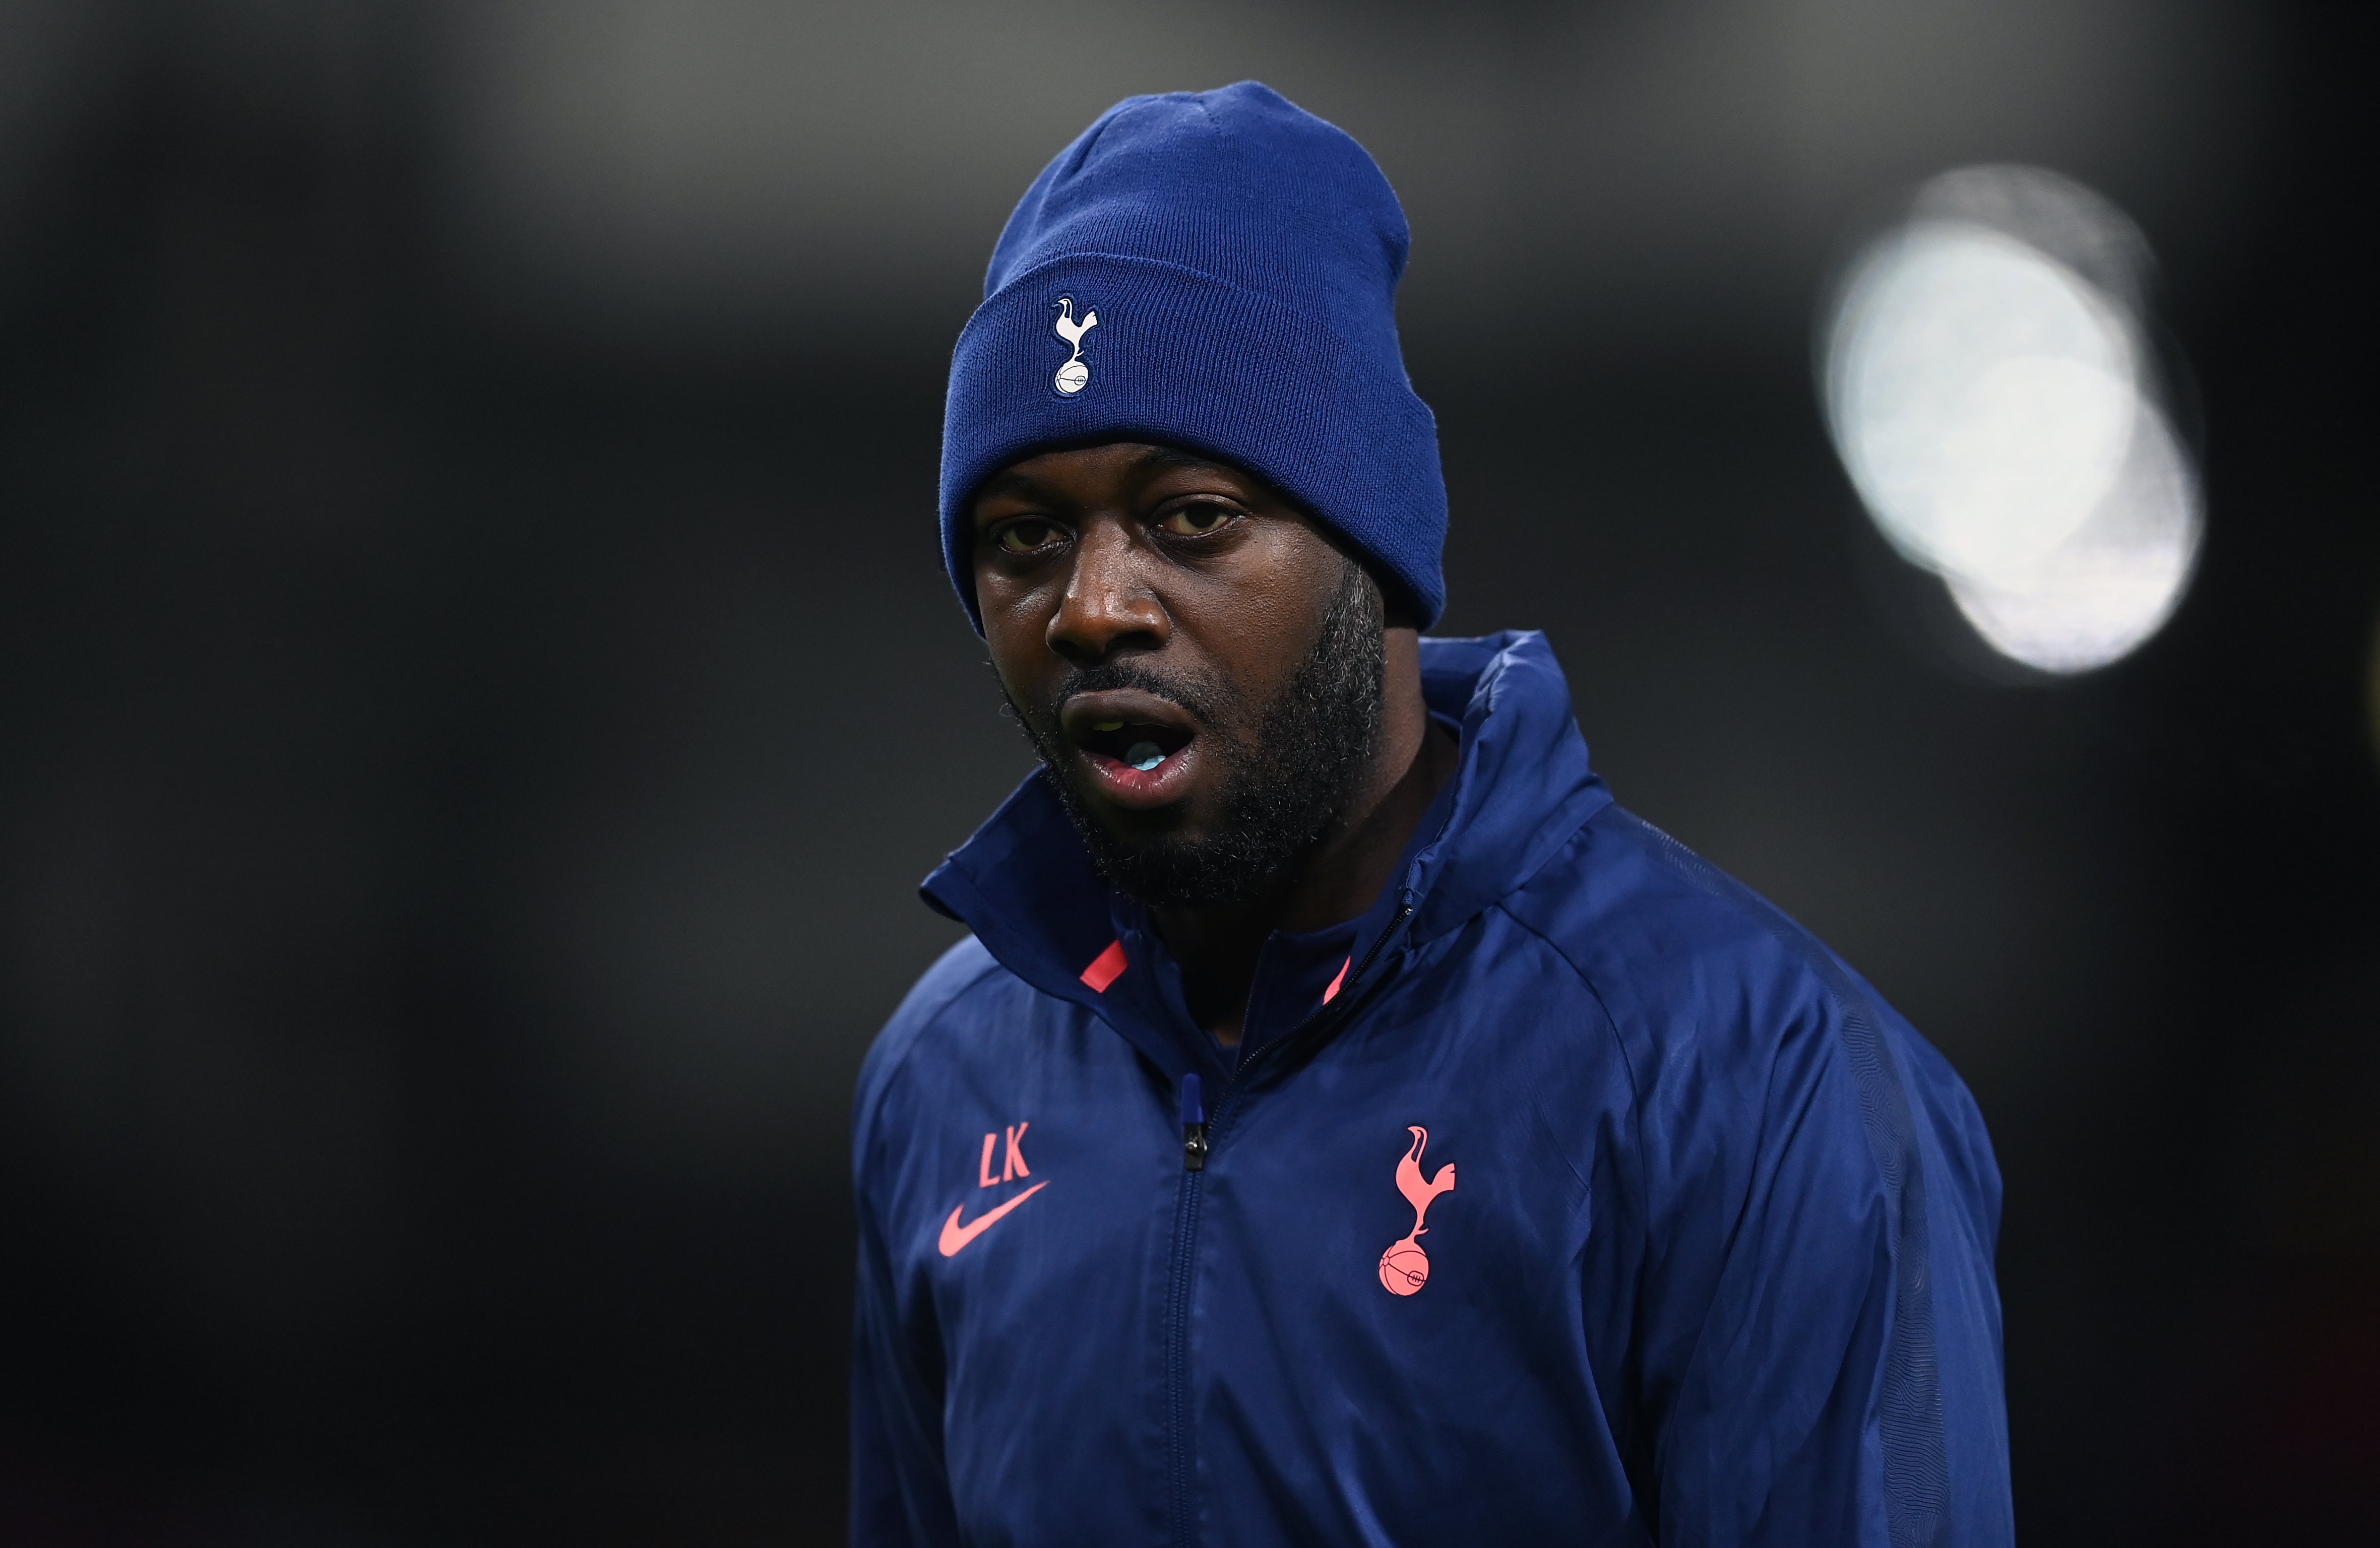 Ledley King saw his mural for the first time (Michael Regan/PA)